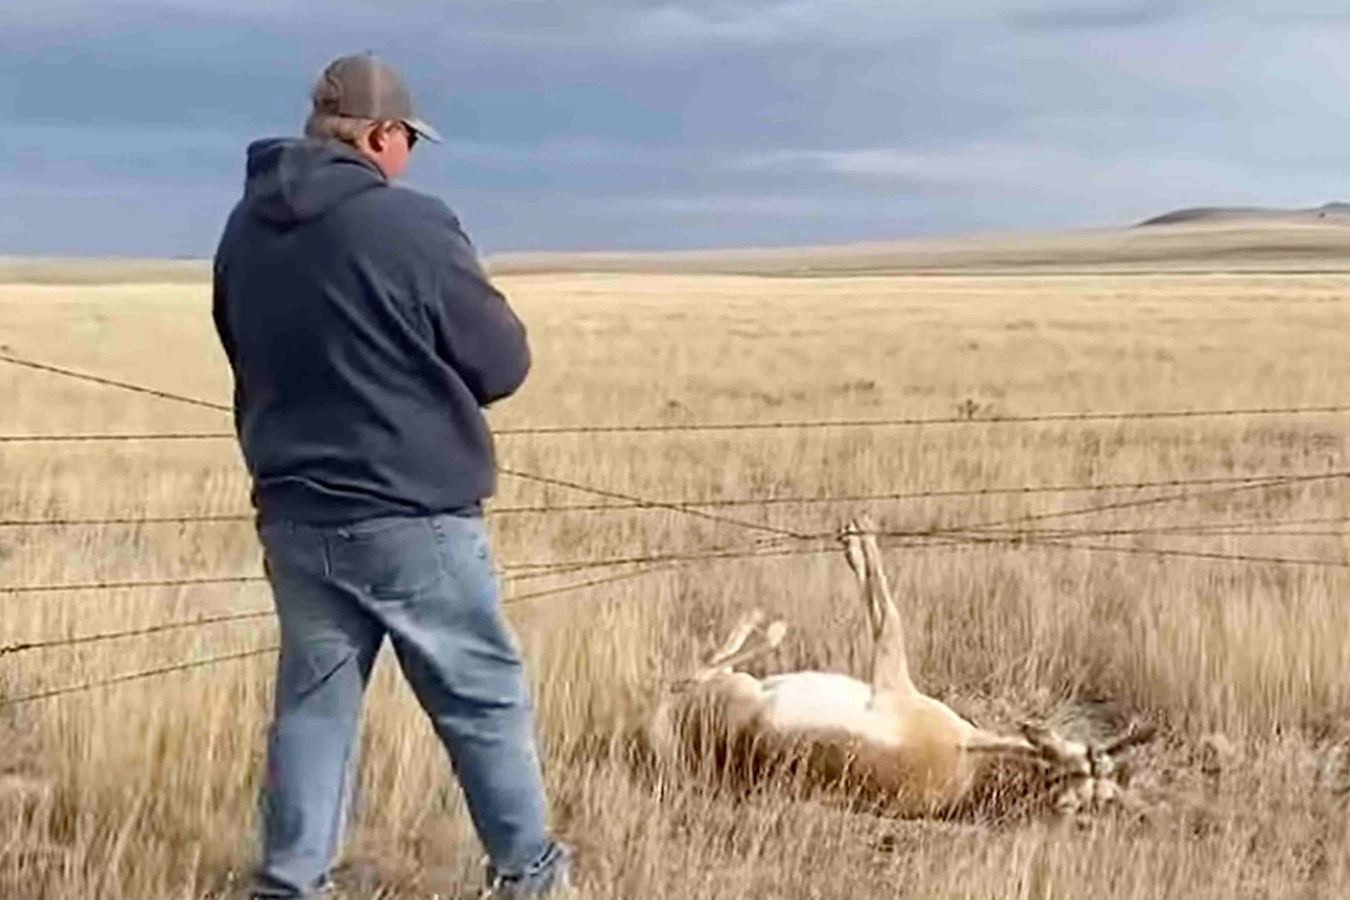 Antelope caught in fence 11 18 23